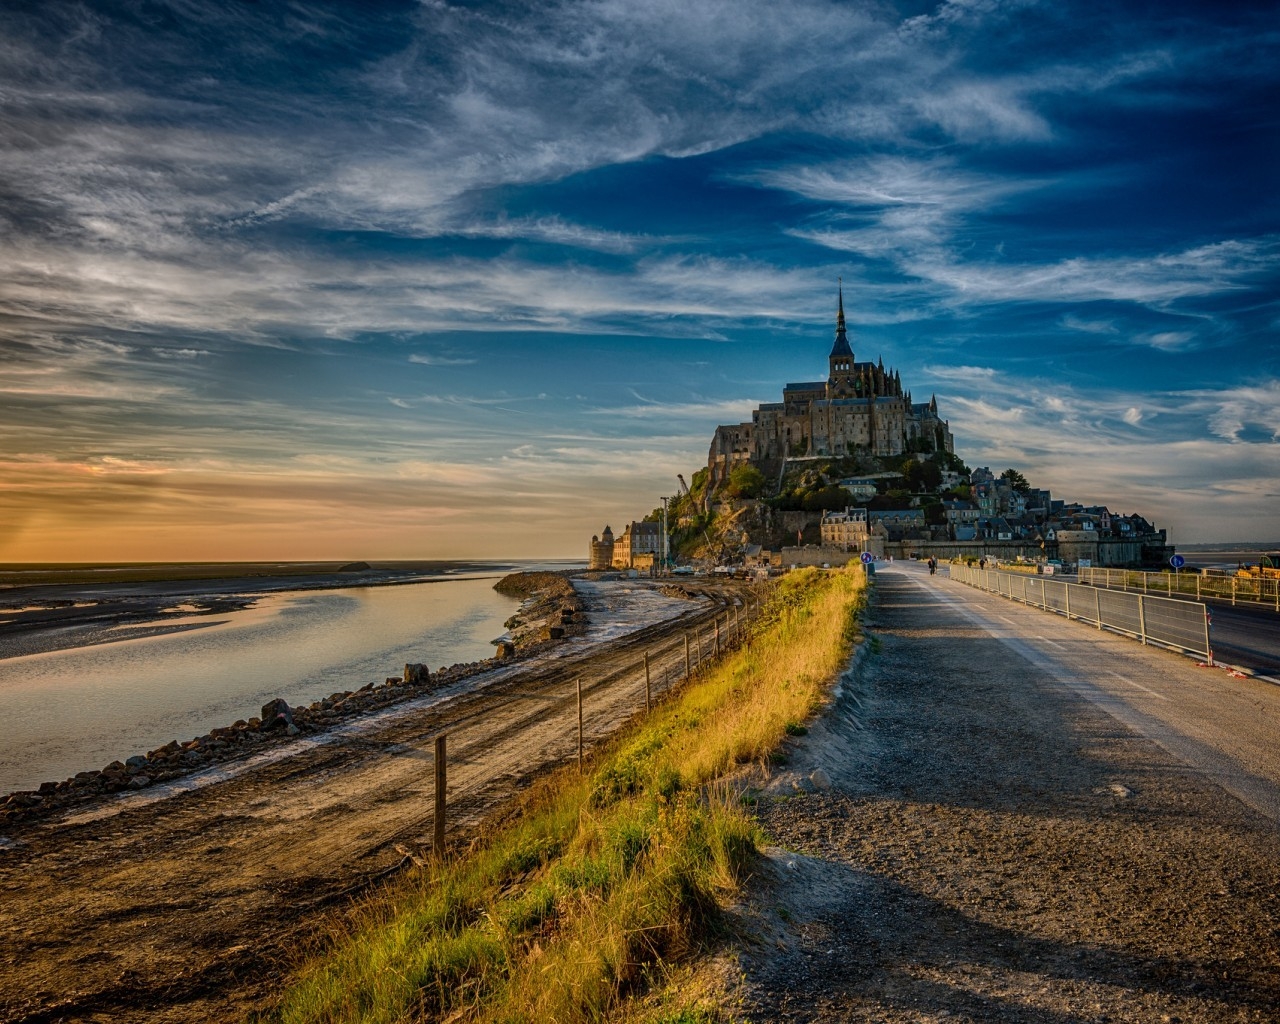 The Island of Mont Saint Michel for 1280 x 1024 resolution